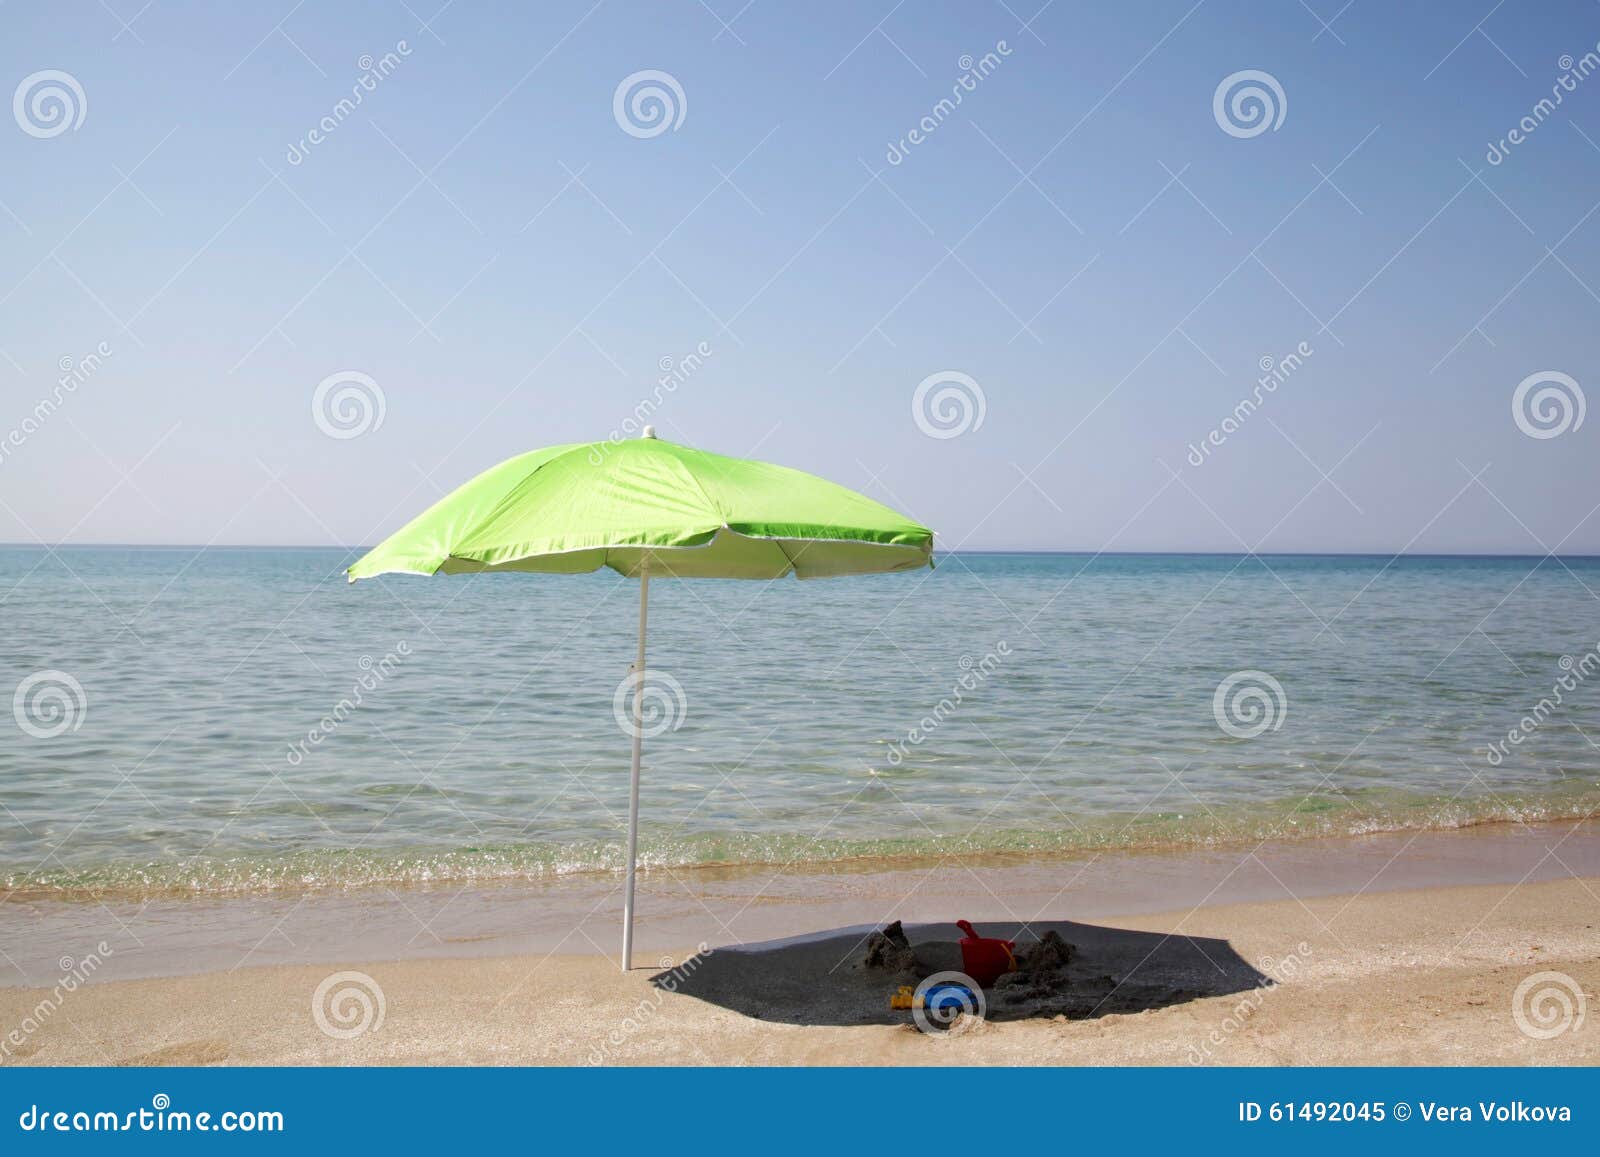 Green Umbrella on the Beach Stock Image - Image of reflection ...